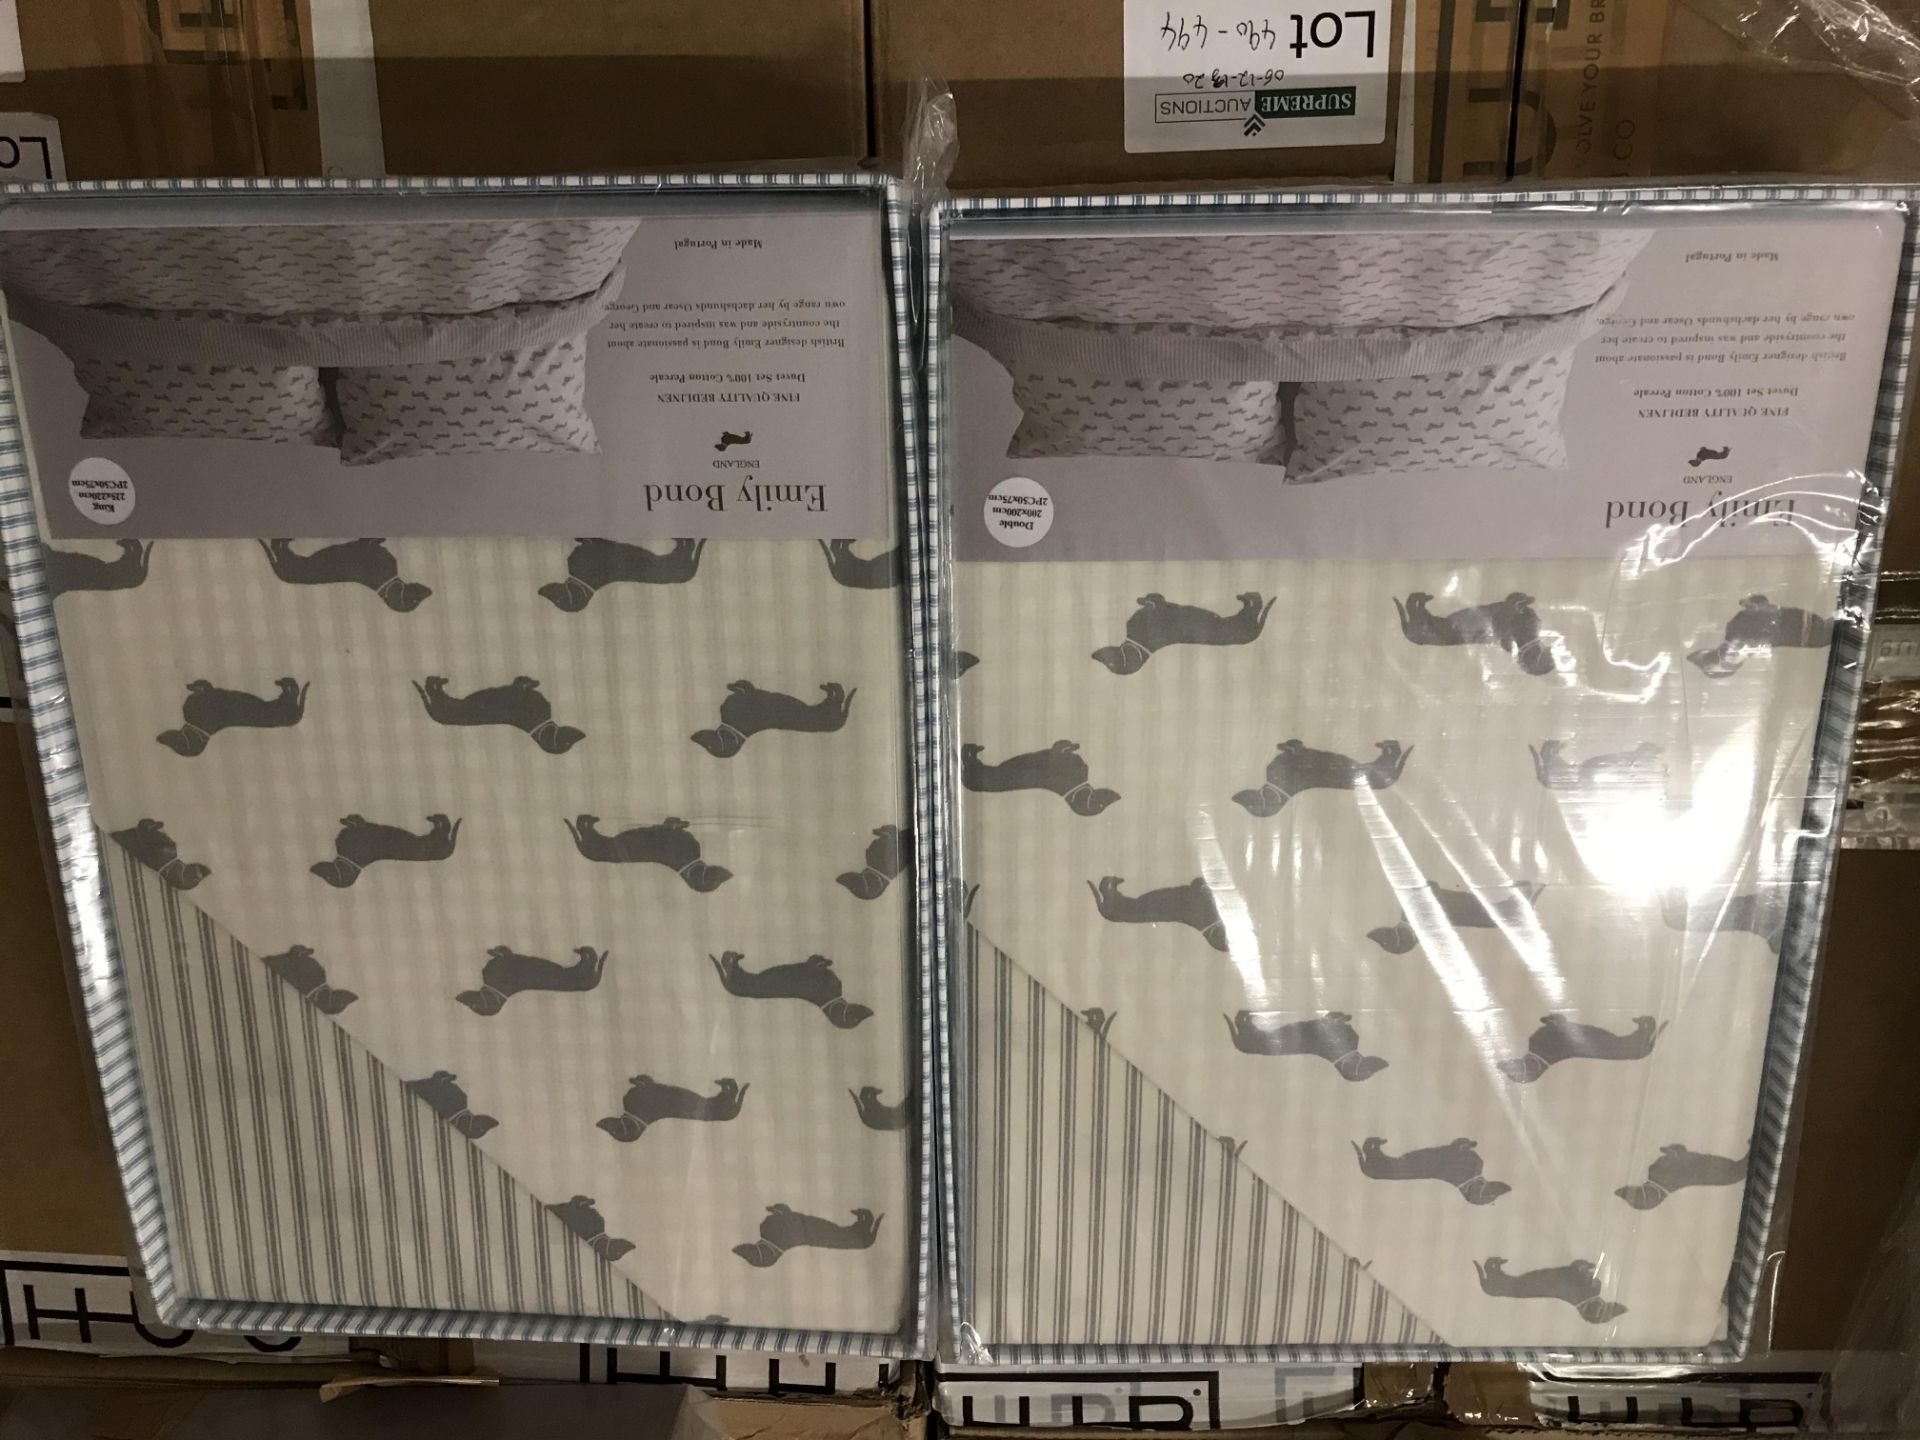 BRAND NEW EMILY BOND DOUBLE DUVET COVER SET WITH DACHSHUND DETAIL COLOUR GREY